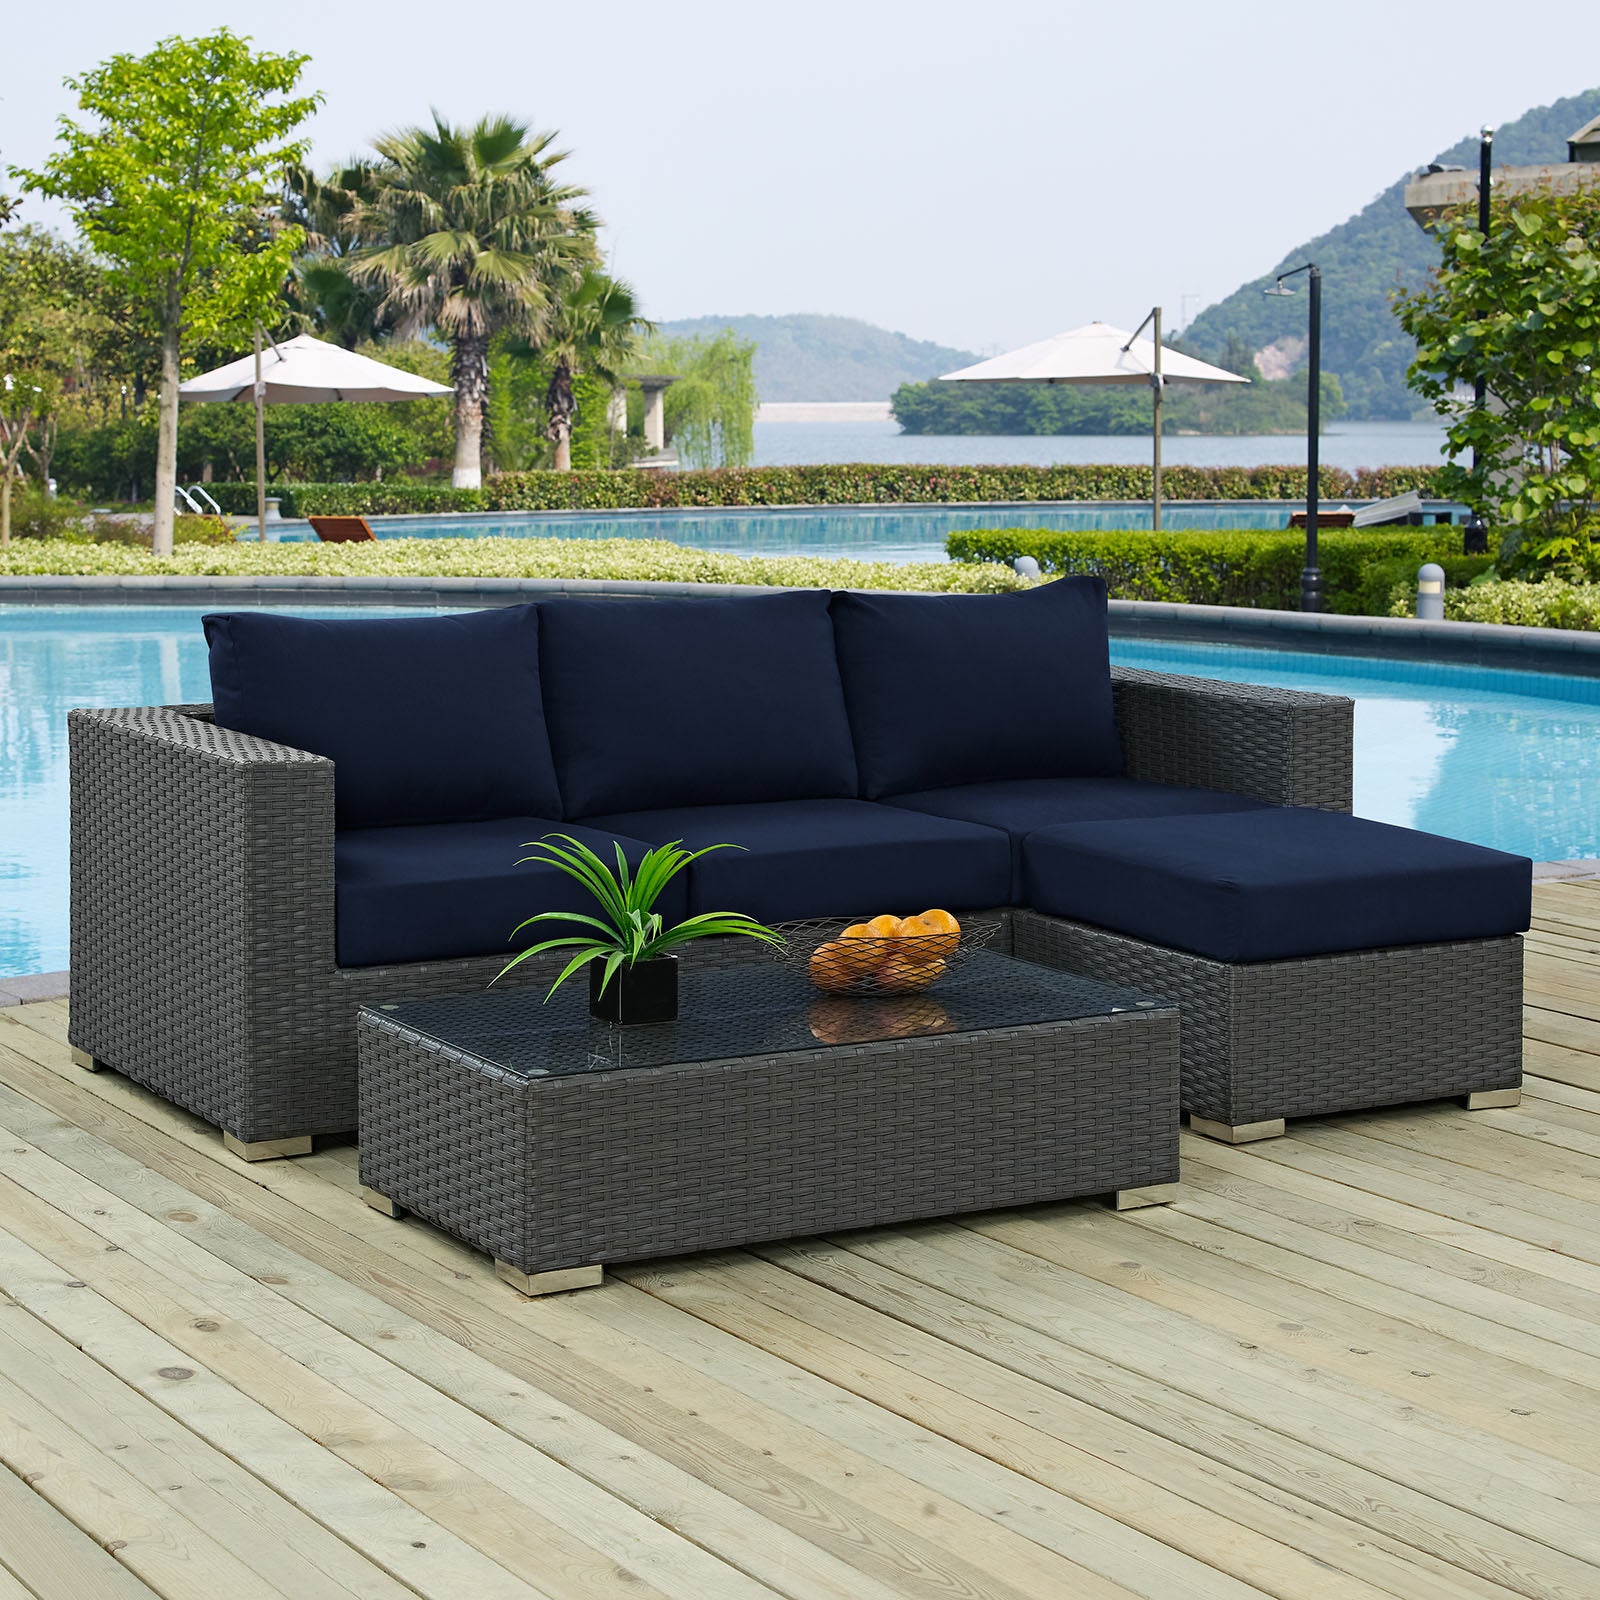 Sojourn 3 Piece Outdoor Patio Sunbrella® Sectional Set - East Shore Modern Home Furnishings